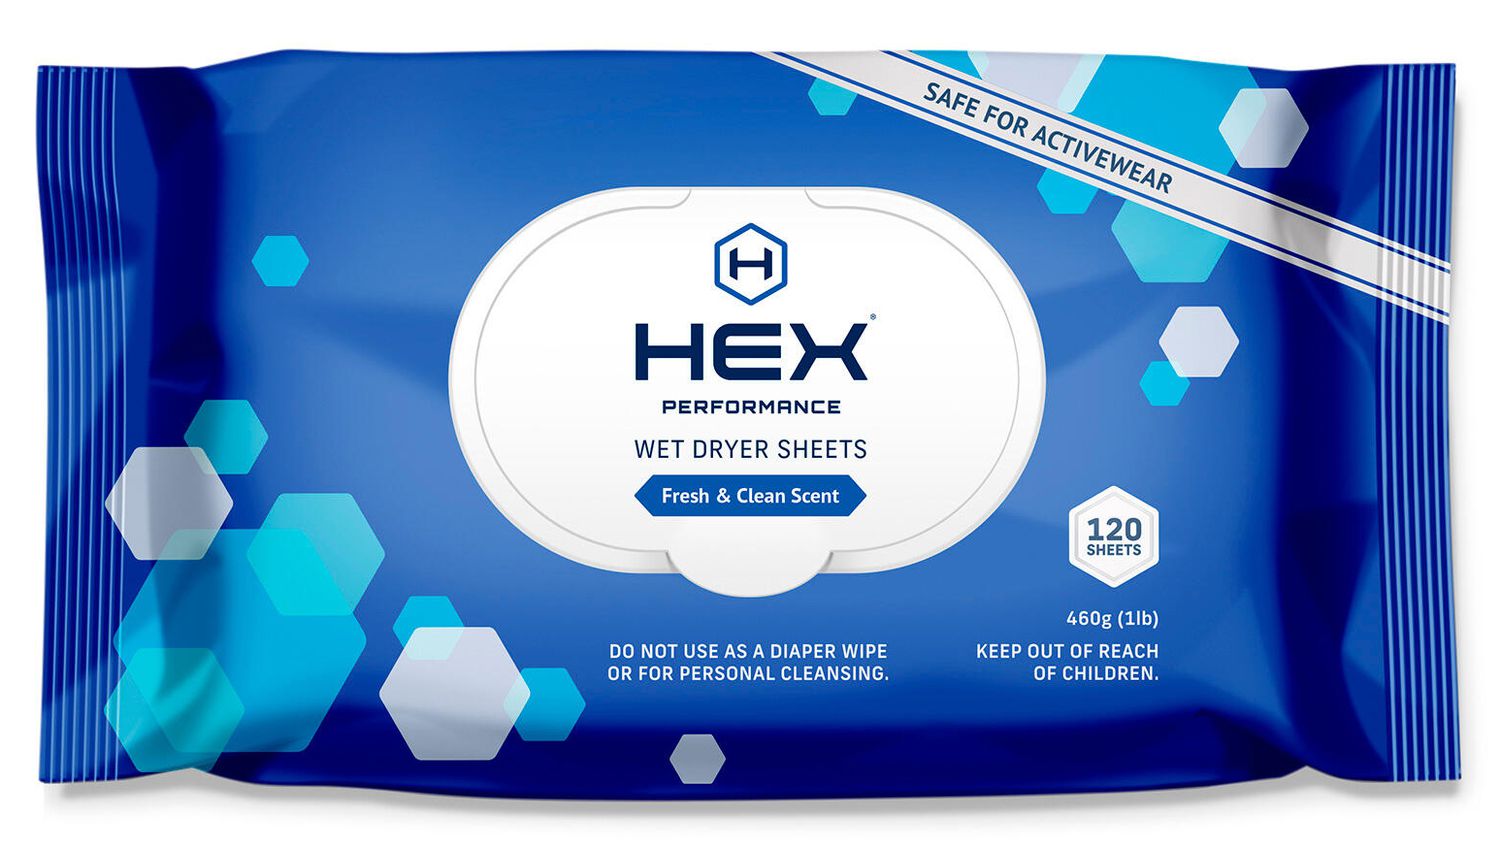 HEX Performance Wet Dryer Sheets Fresh and Clean Scent